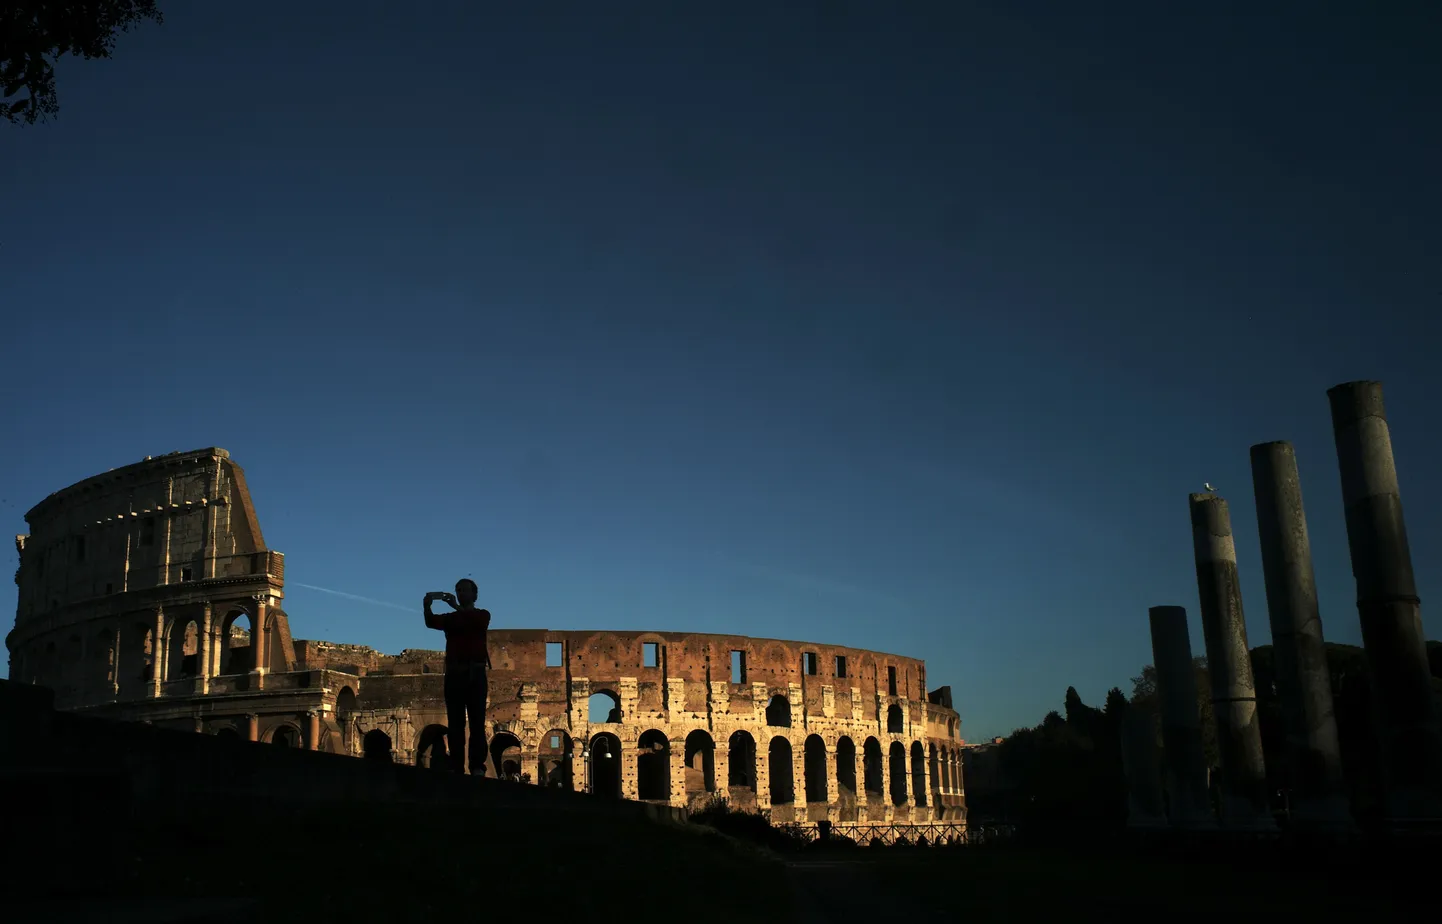 A man takes pictures near the Colosseum at sunset on November 21, 2014 in Rome.  AFP PHOTO / FILIPPO MONTEFORTE